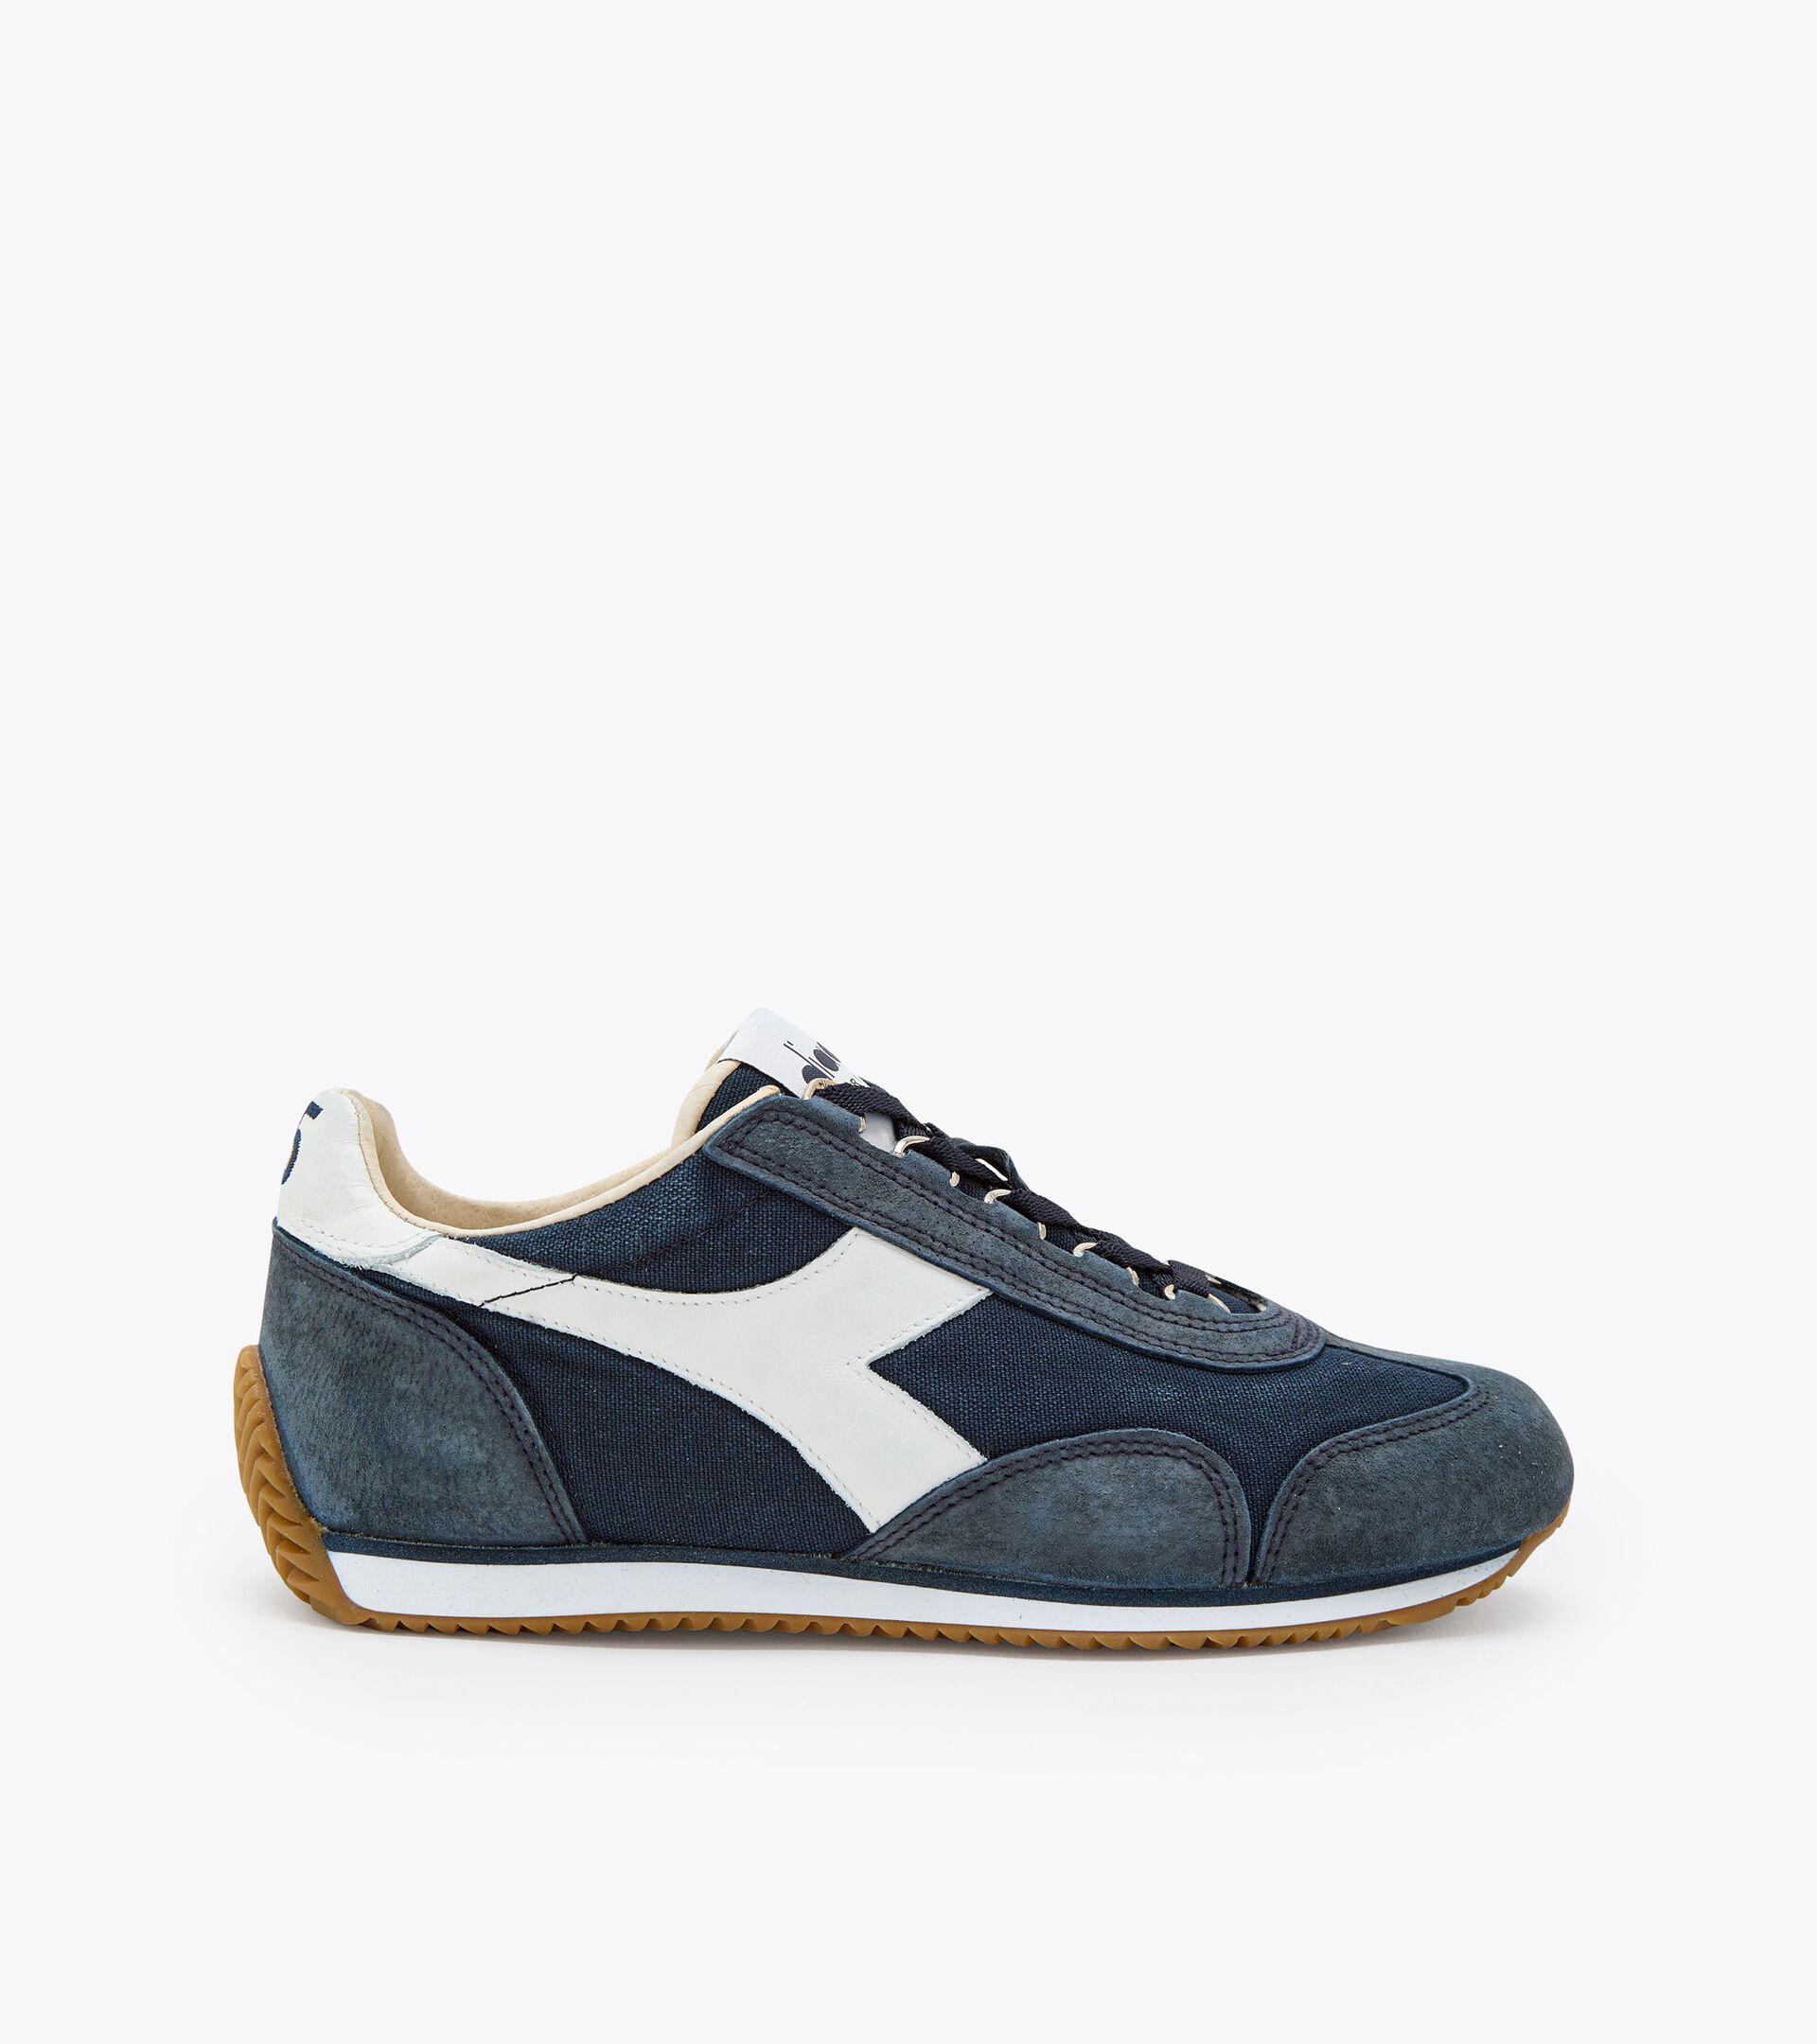 Forskelle tidligere Betydning EQUIPE H CANVAS STONE WASH Heritage shoe - Unisex - Diadora Online Store ID